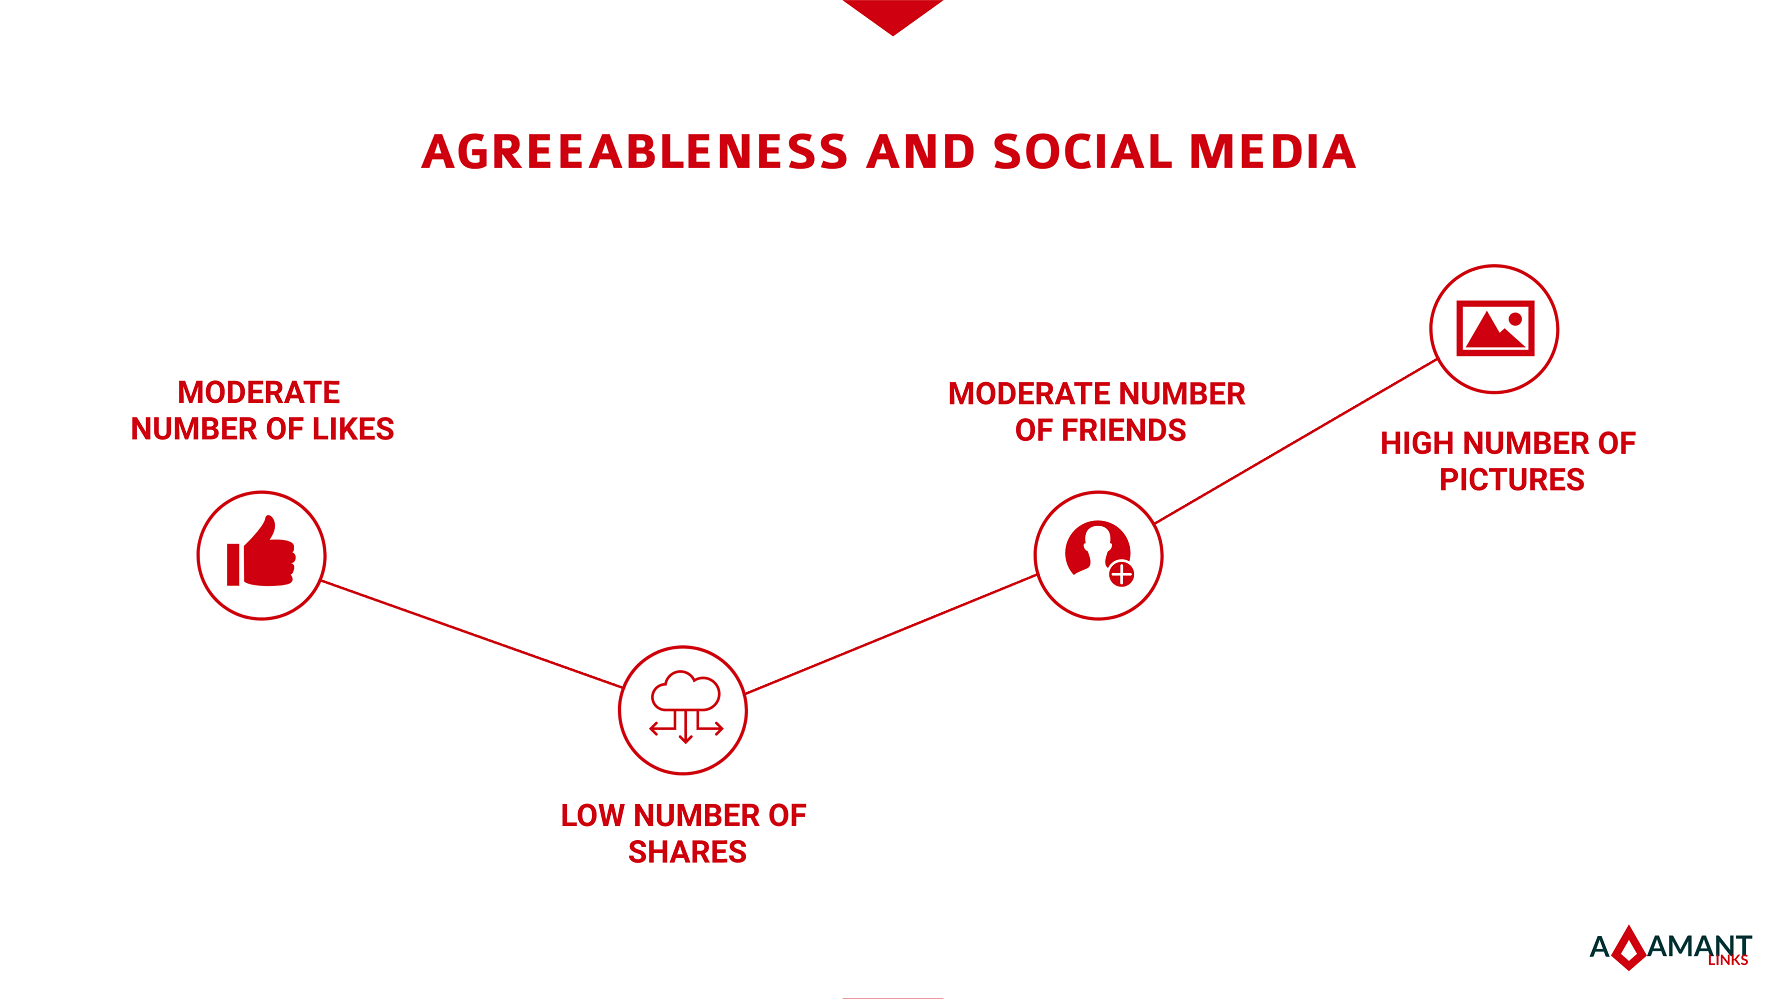 Adamant Links - Agreeableness and Social Media